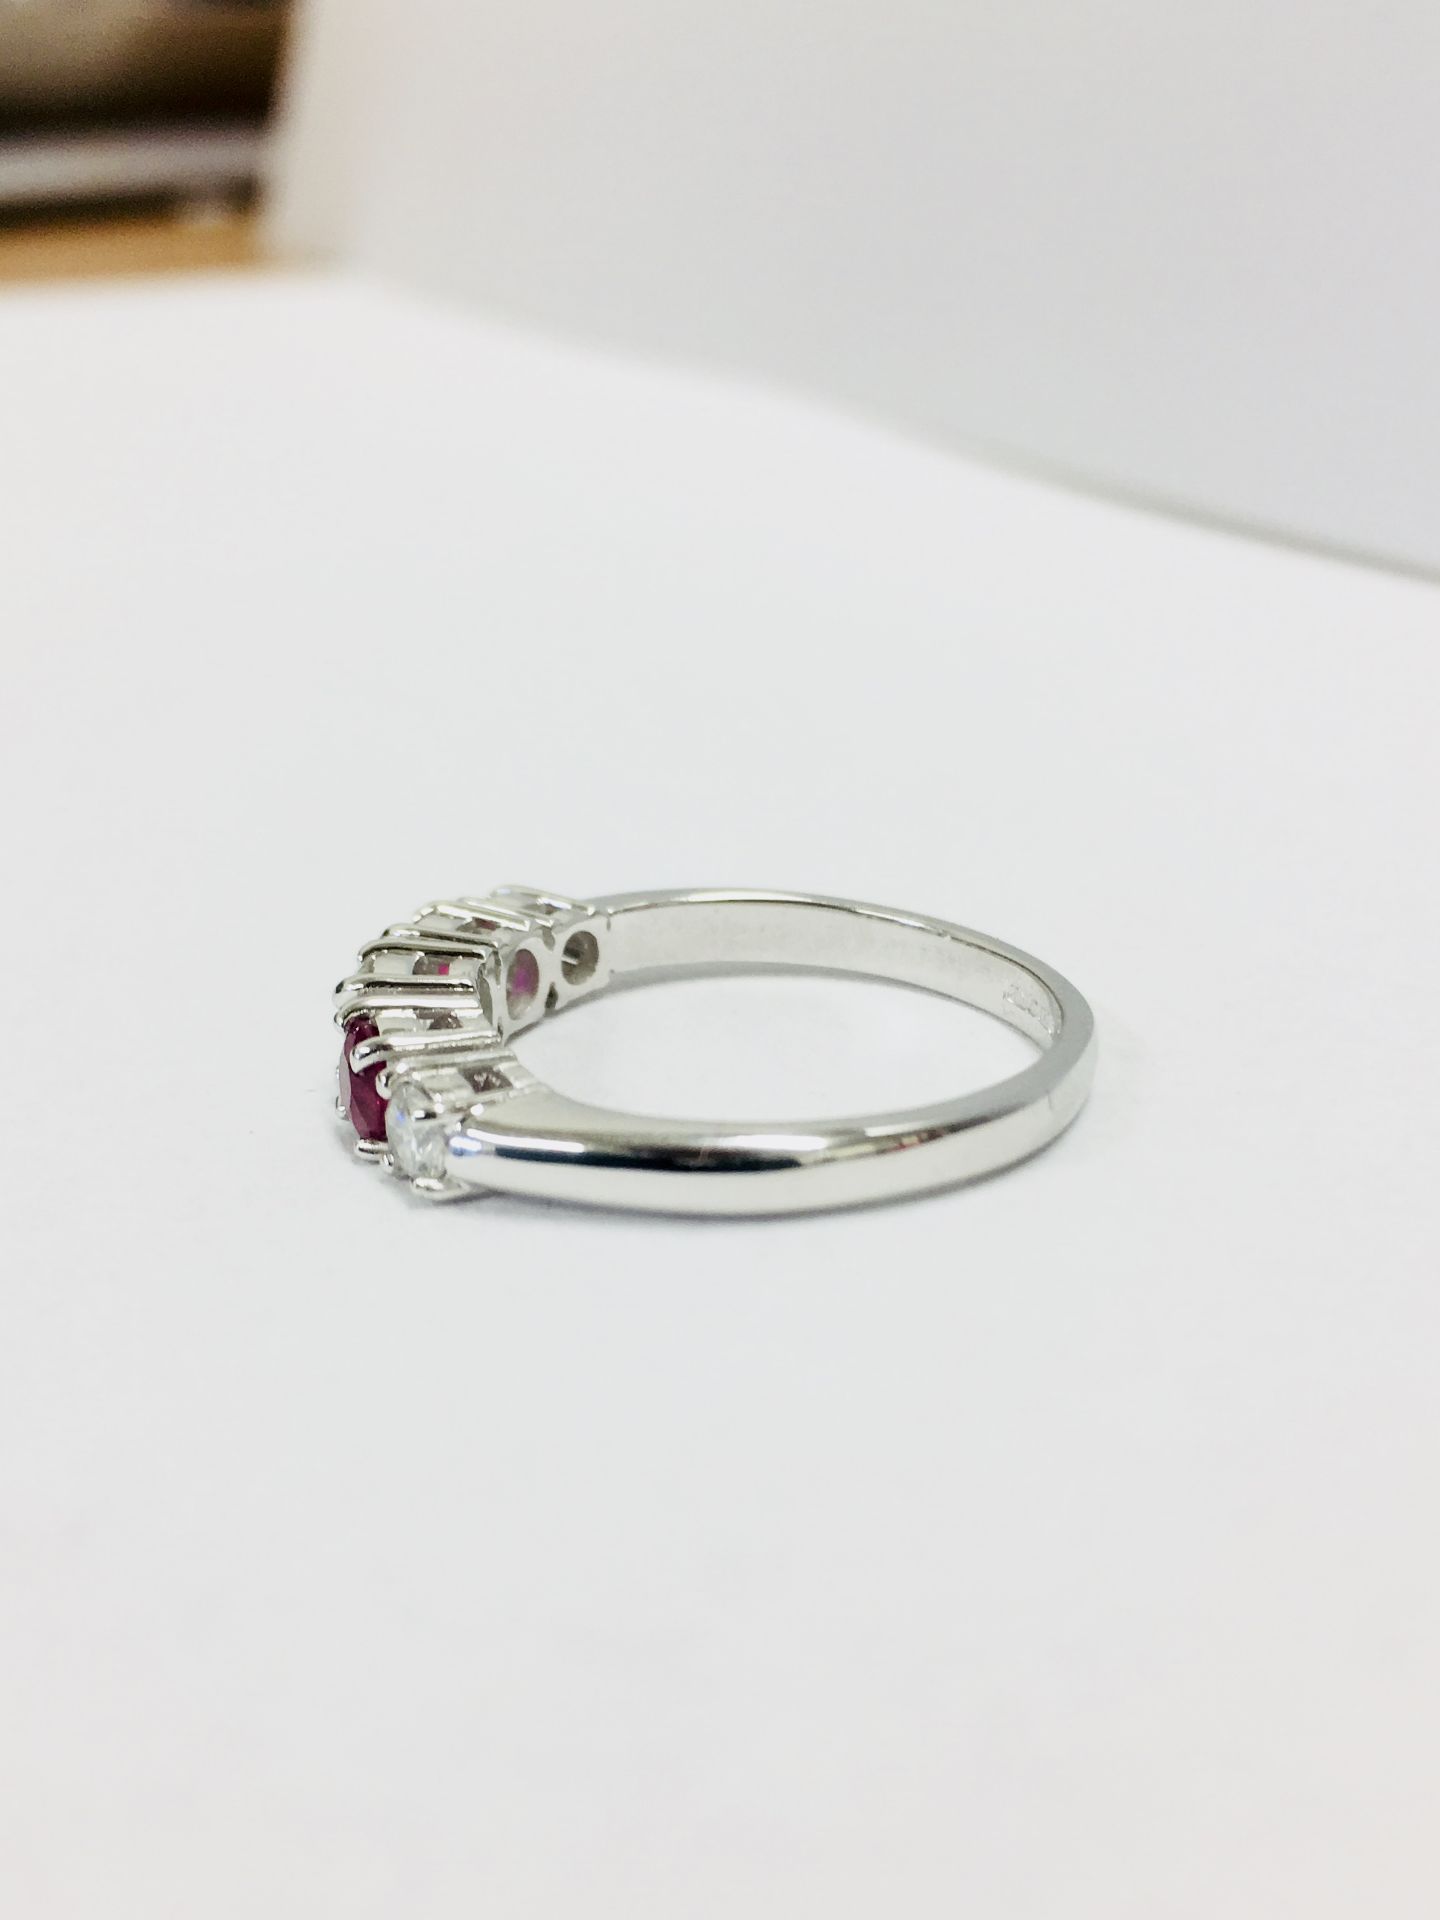 0.75Ct Ruby And Diamond Five Stone Ringset In 18Ct Gold. - Image 2 of 7